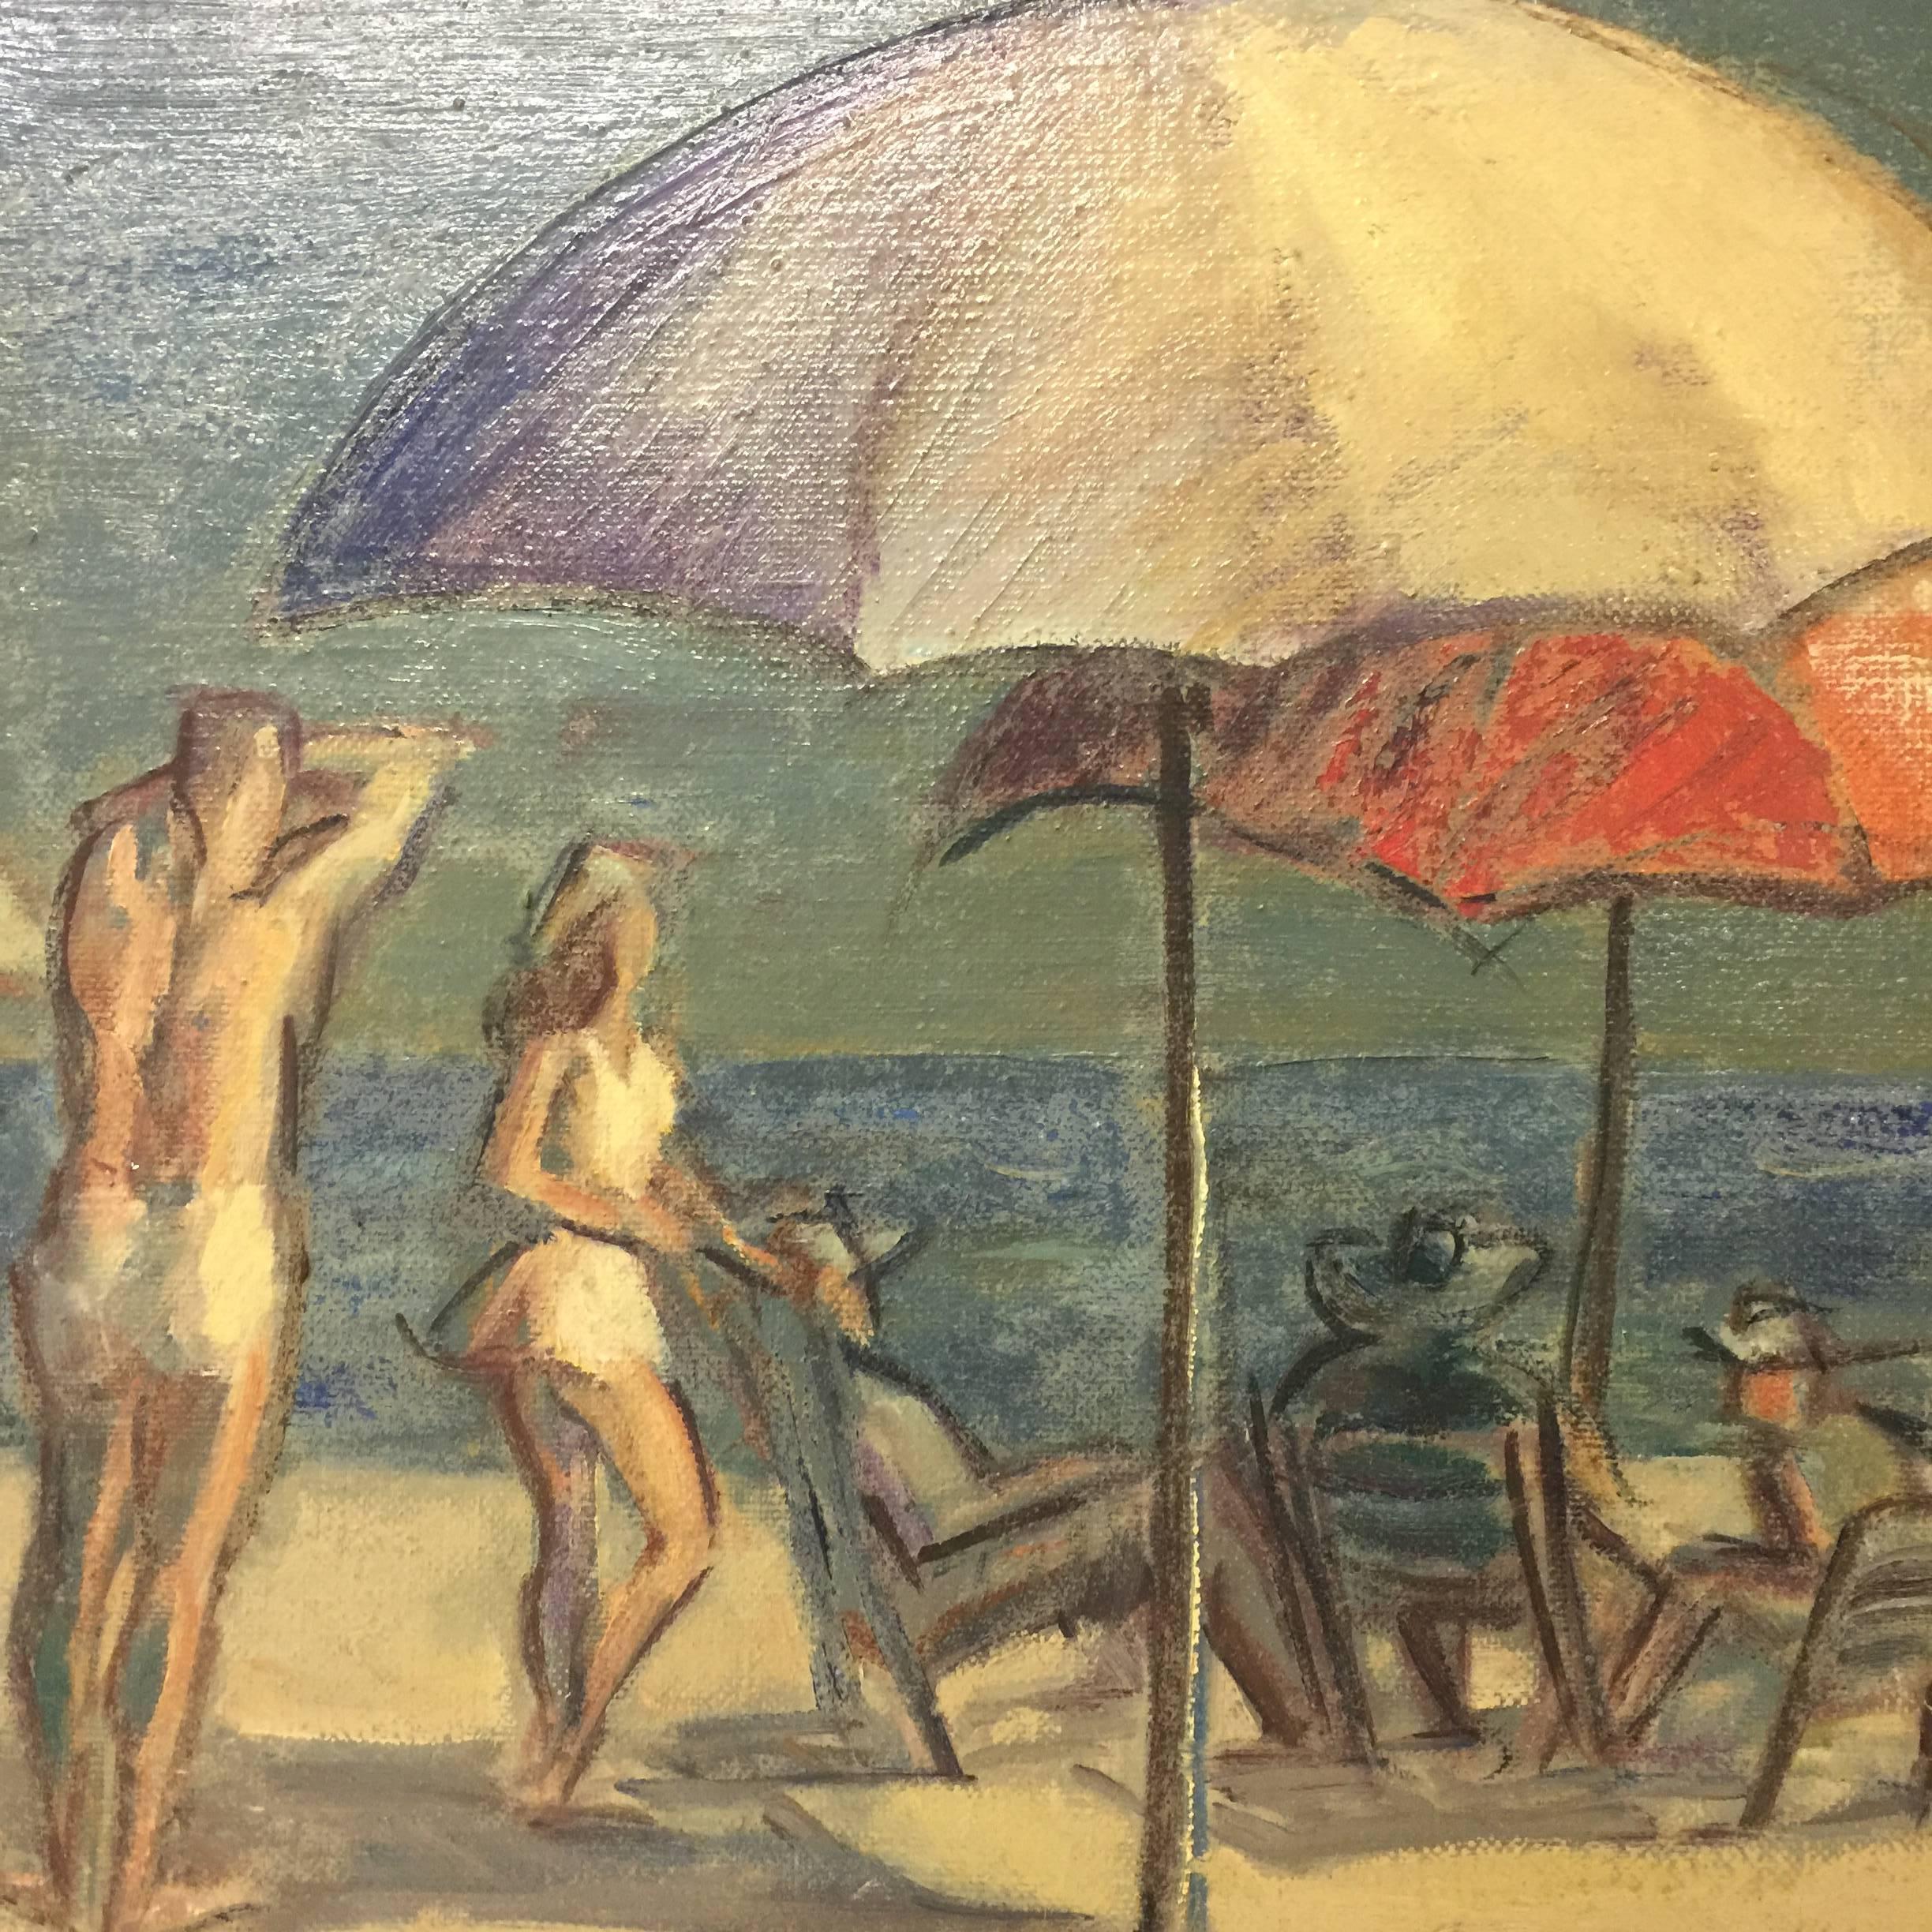 New Jersey Beach Scene Oil on Canvas Painting Signed Imfof, Modern Period Frame 4